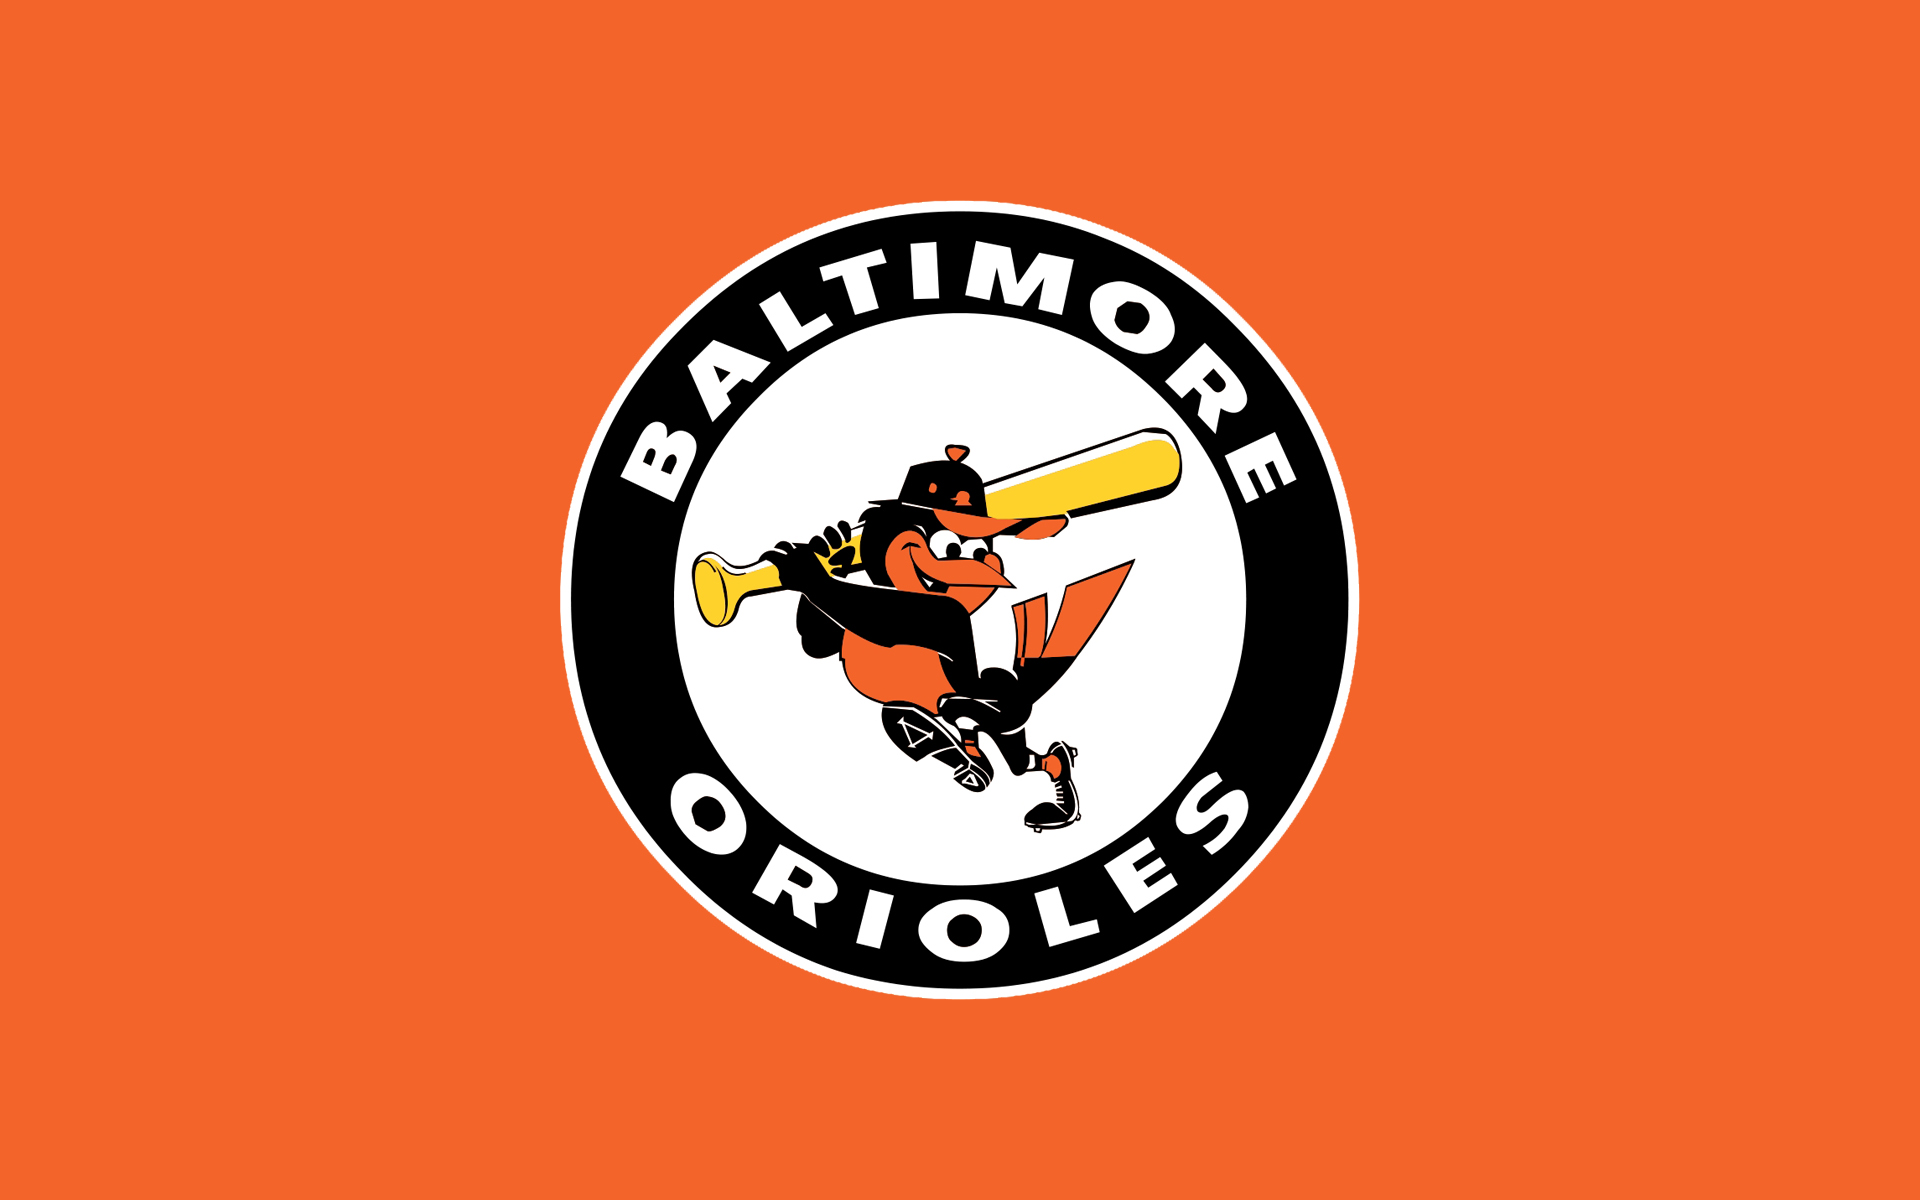 Baltimore Orioles HD Wallpaper Pictures